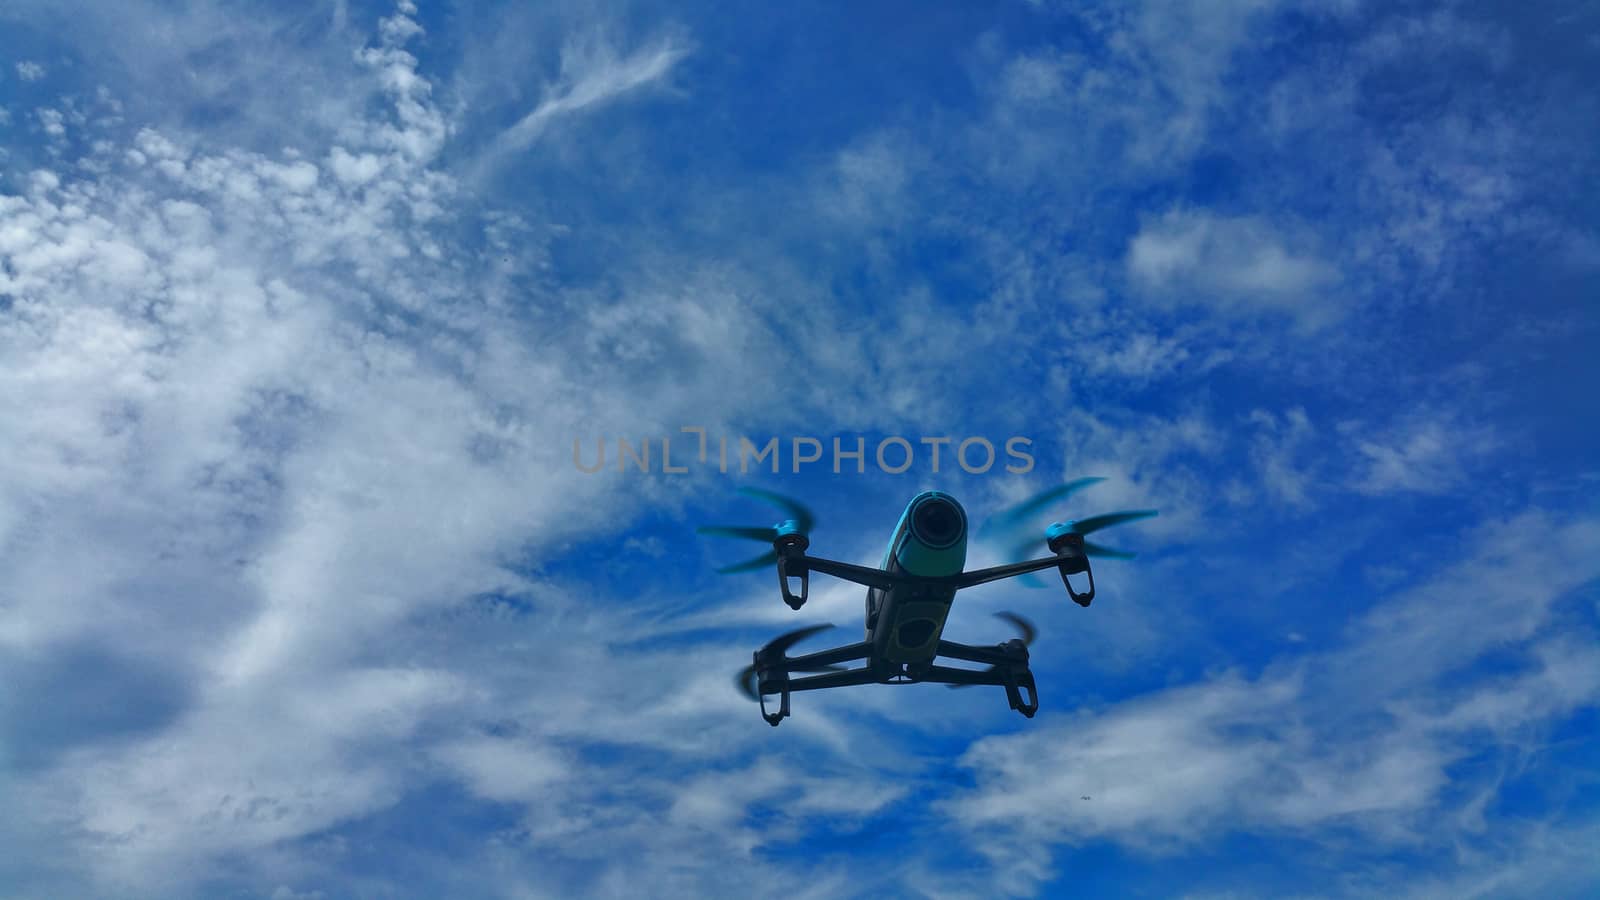 blue drone on the blue sky with white clouds